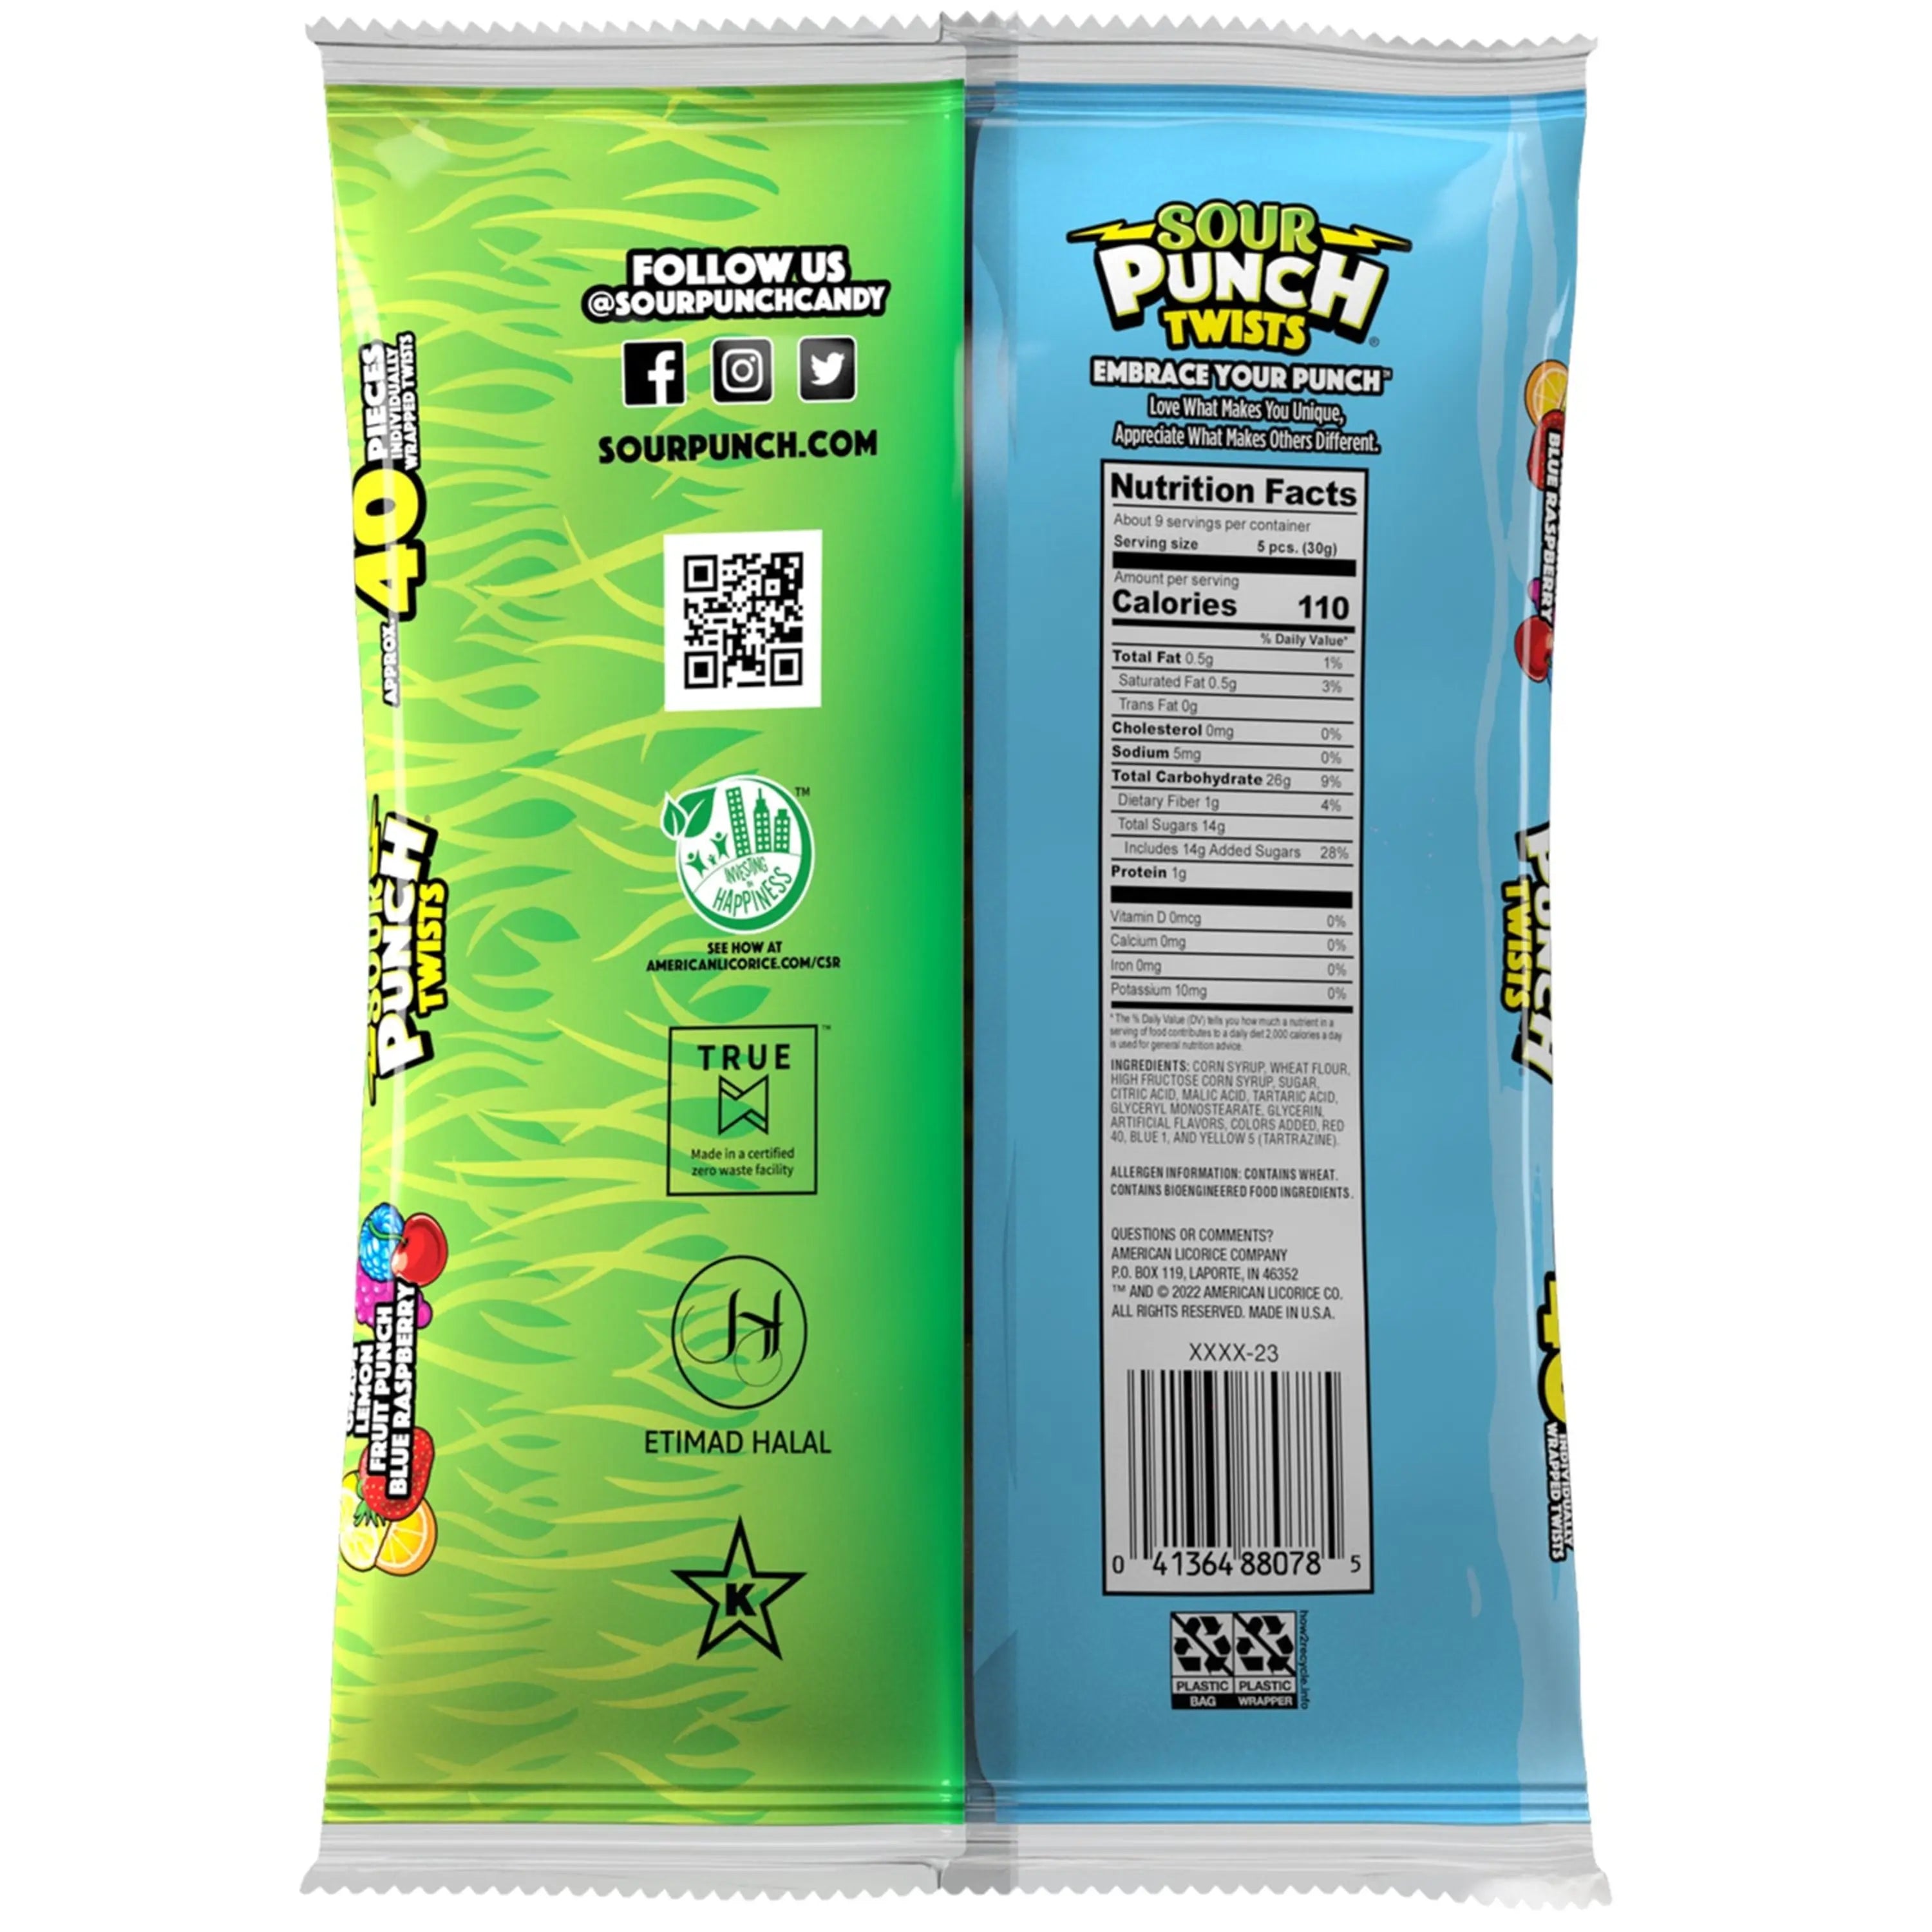 SOUR PUNCH Individually Wrapped Easter Candy Twists back of 9oz bag